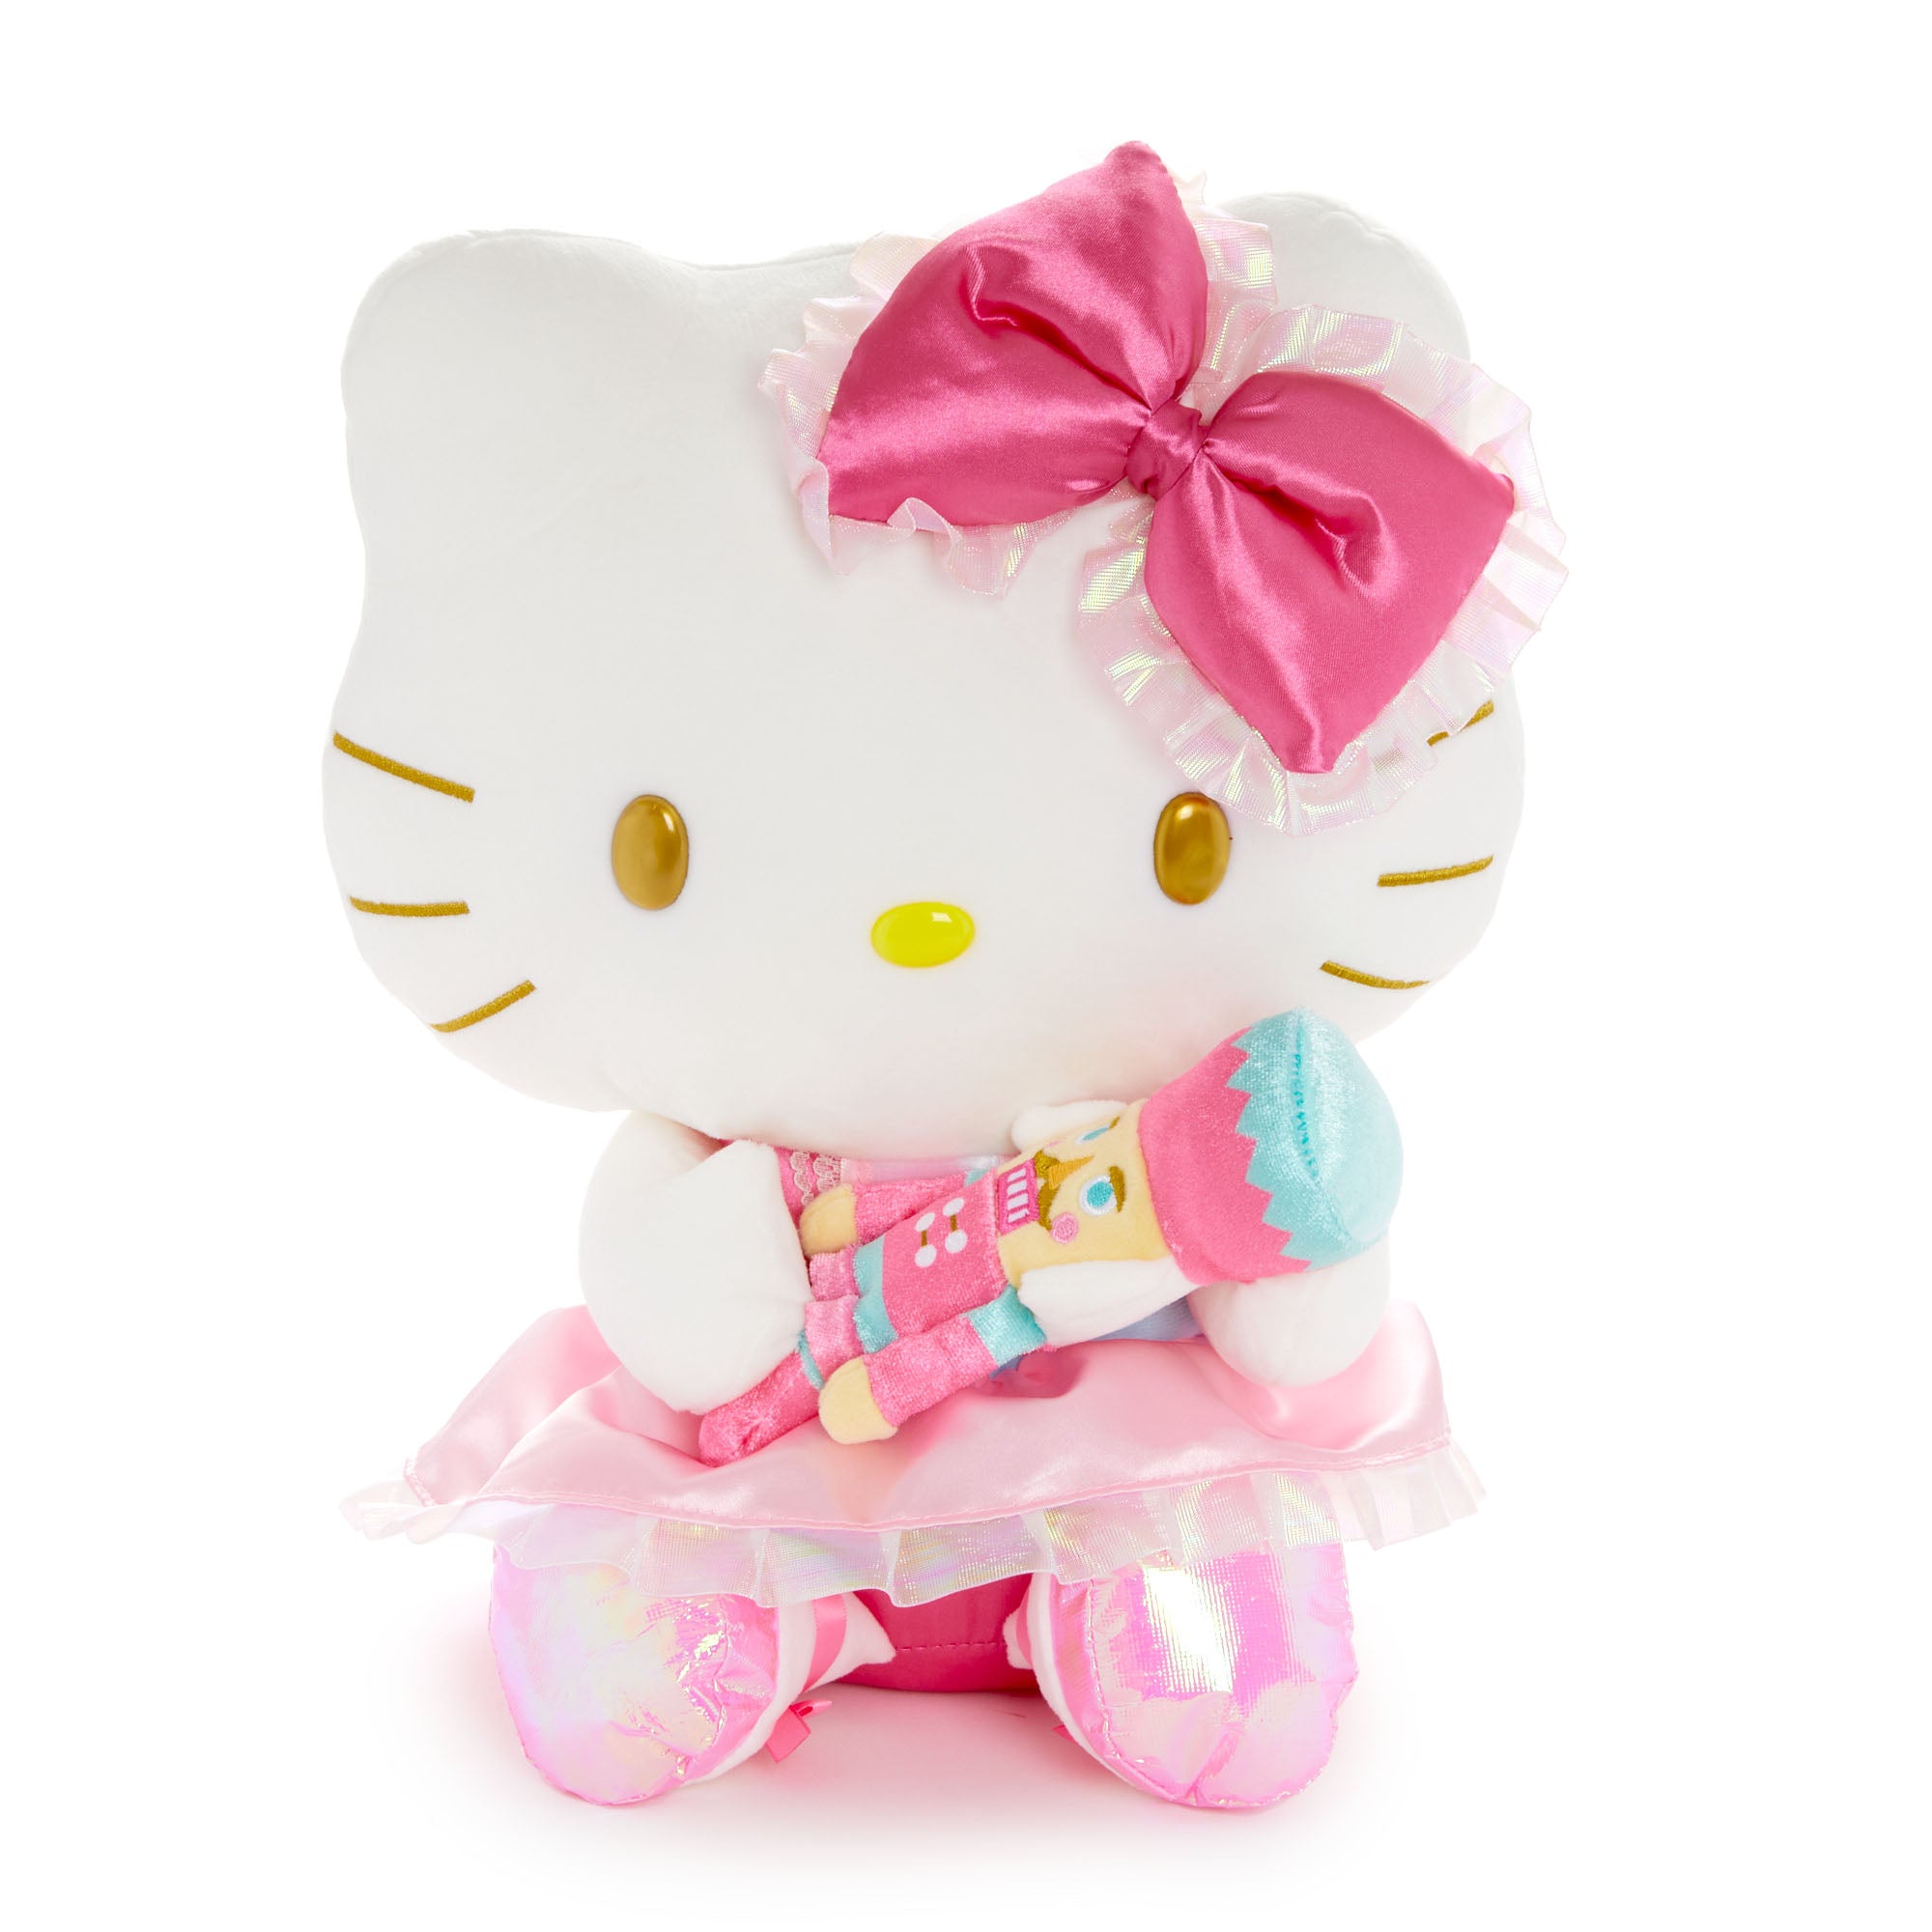 Say hello to Hula Hula Hello Kitty, other Sanrio characters & Asian snacks  at the lower level of Elizabeth Street Mall, 13-15 Elizabeth St #chinatown  #chinatownnyc #supportchinatown #supportsmallbusiness #giftideas #xmasgifts  #christmasgifts #hellokitty #